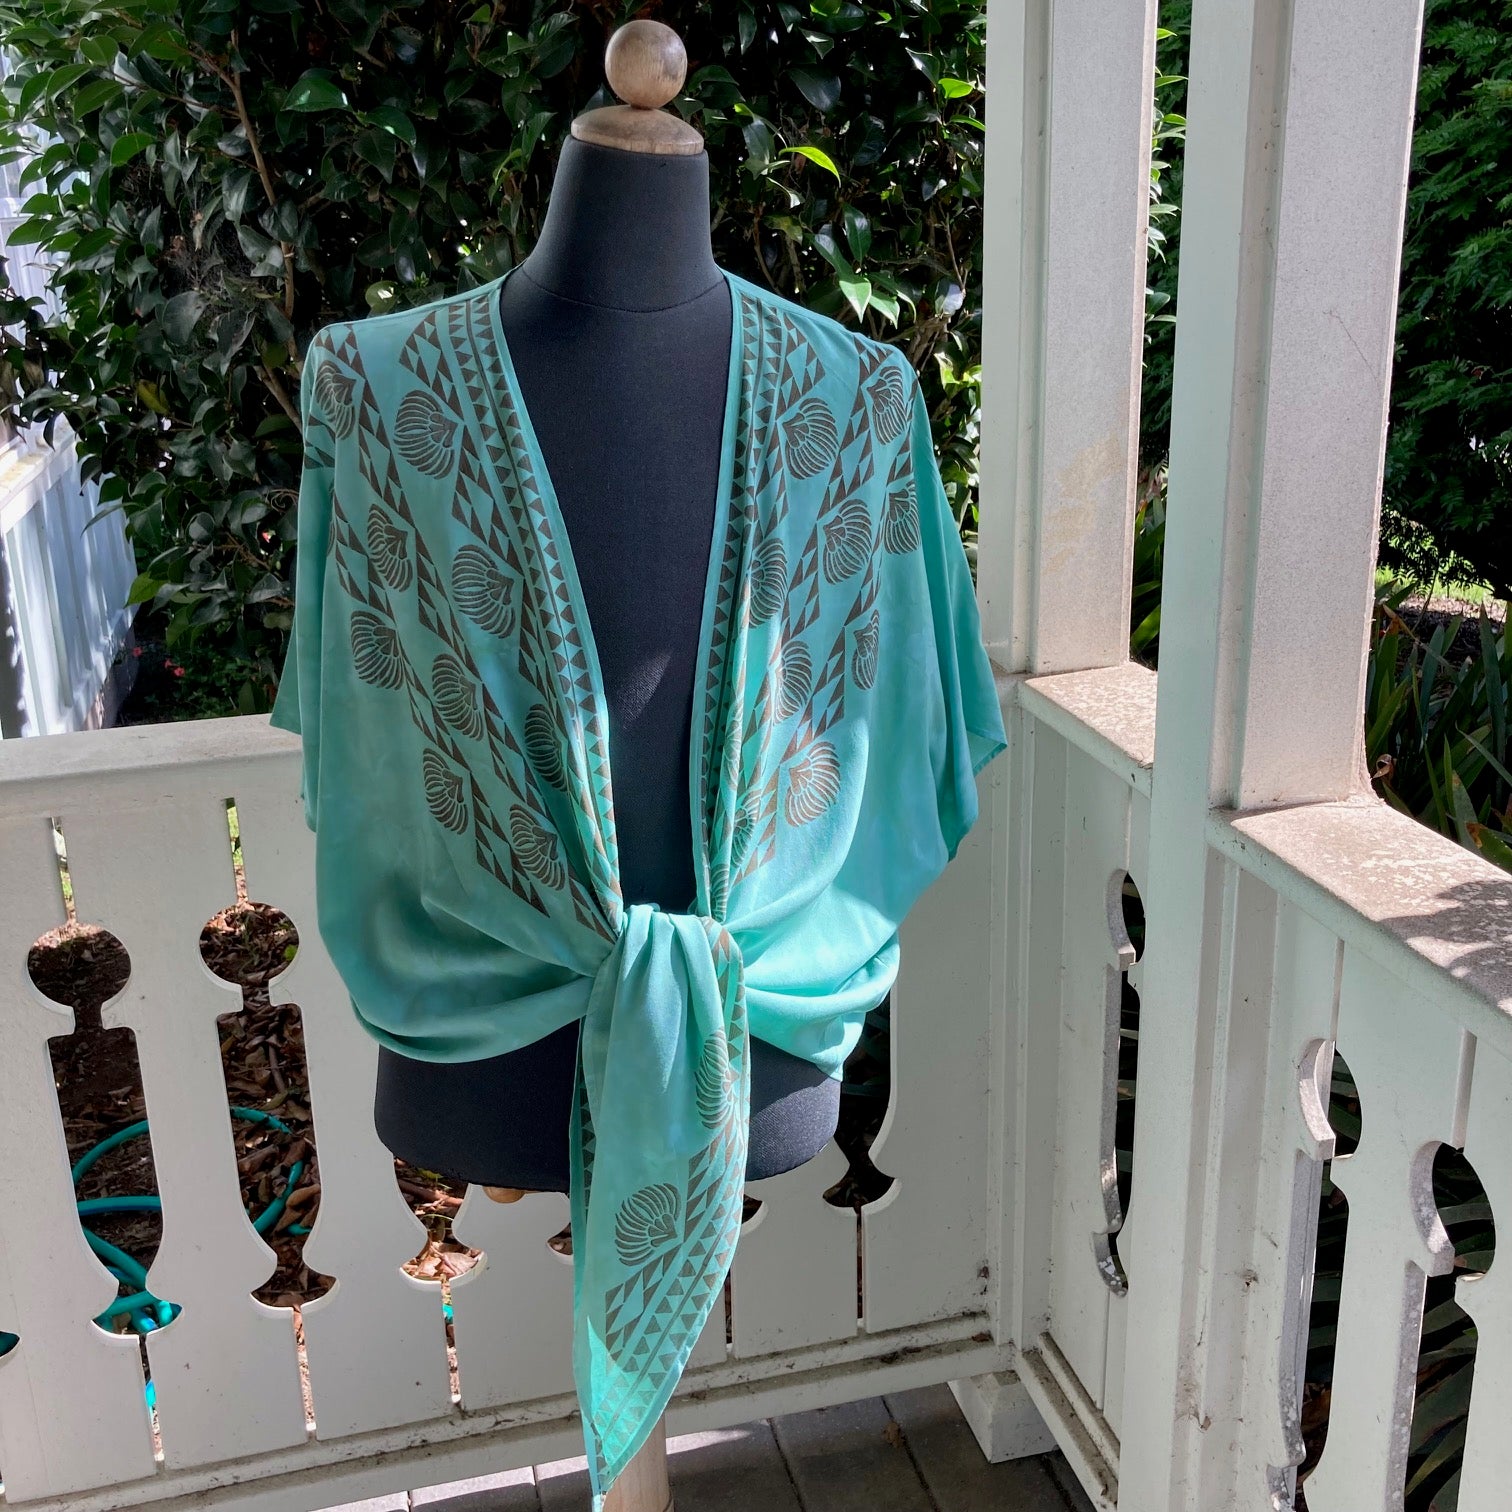 Ohe Kapala TIE Blouse in Mint Green with Mauna and Lehua